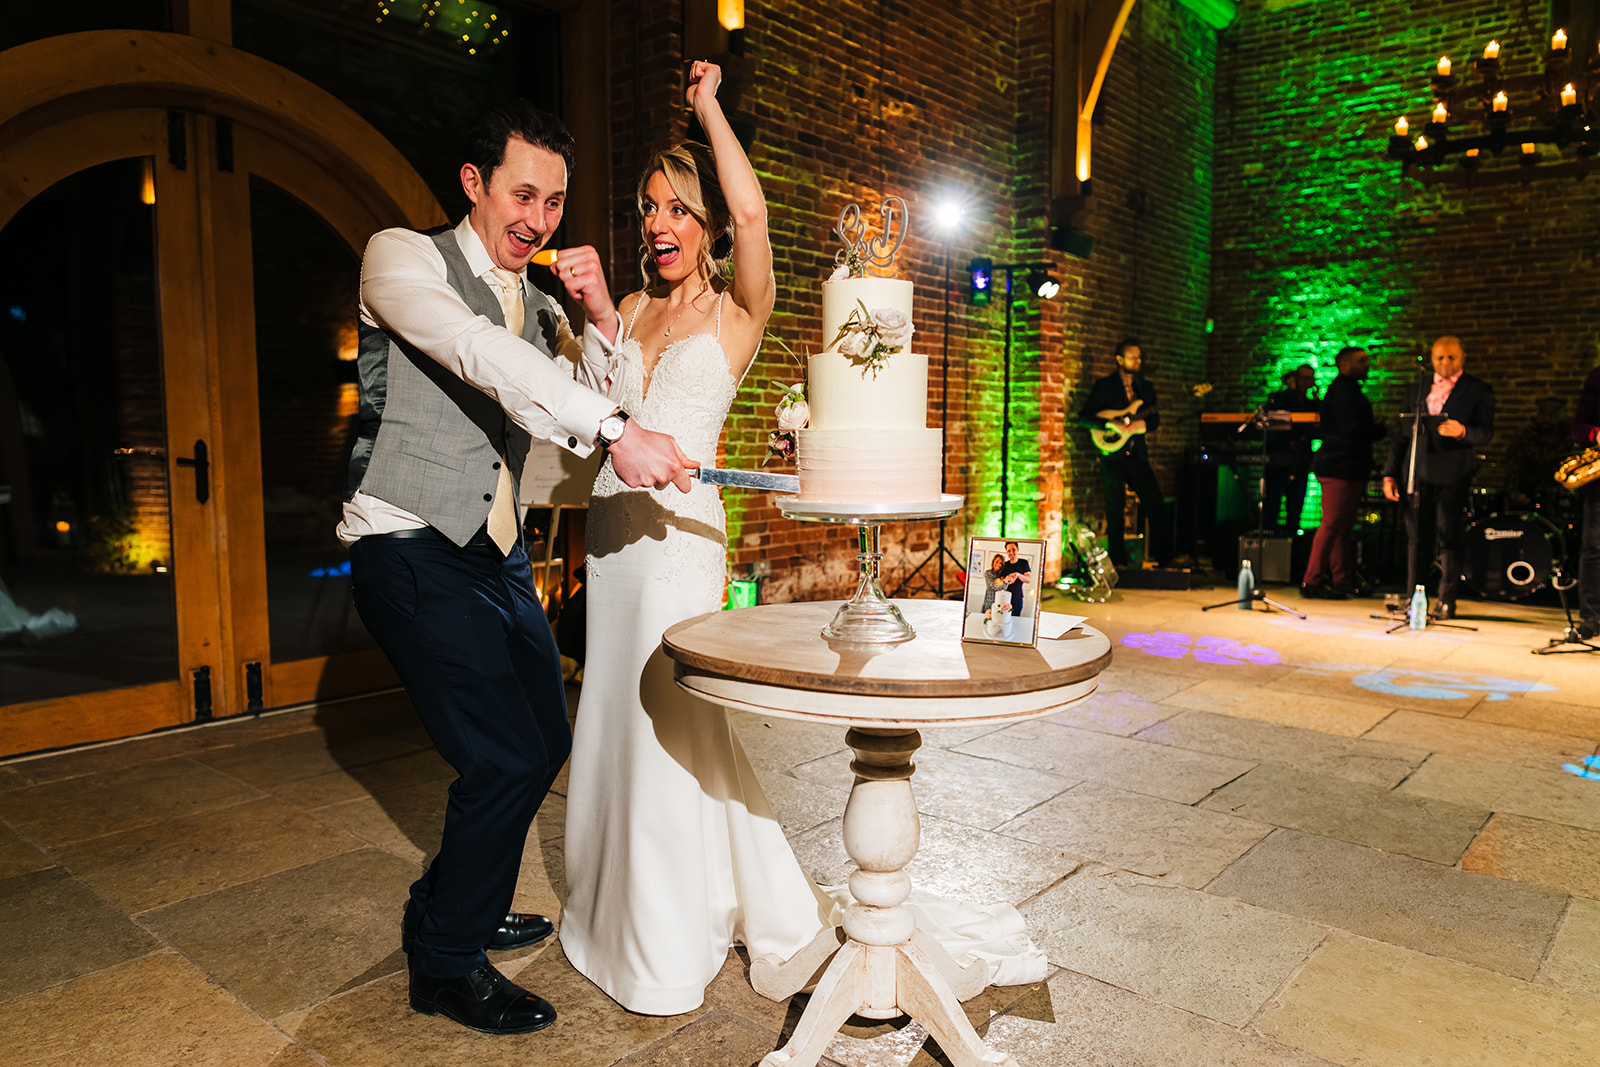 Hazel Gap Wedding Photography - the bride and groom, cutting the cake in the main barn